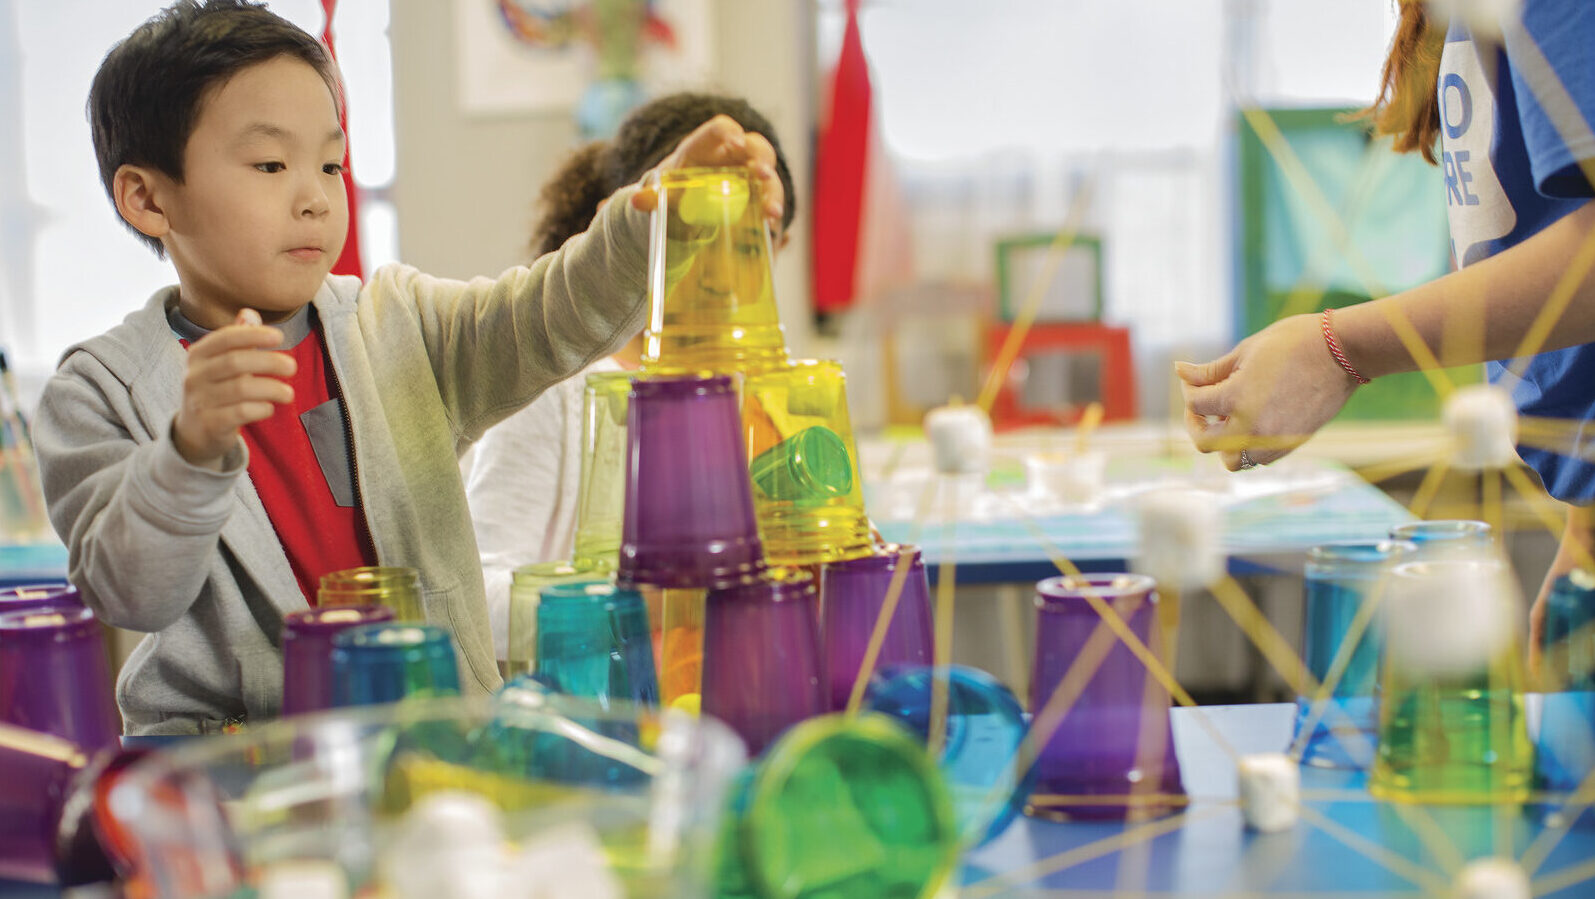 fun YMCA programs - a picture showing children making experiments and playing with colored plastic cups